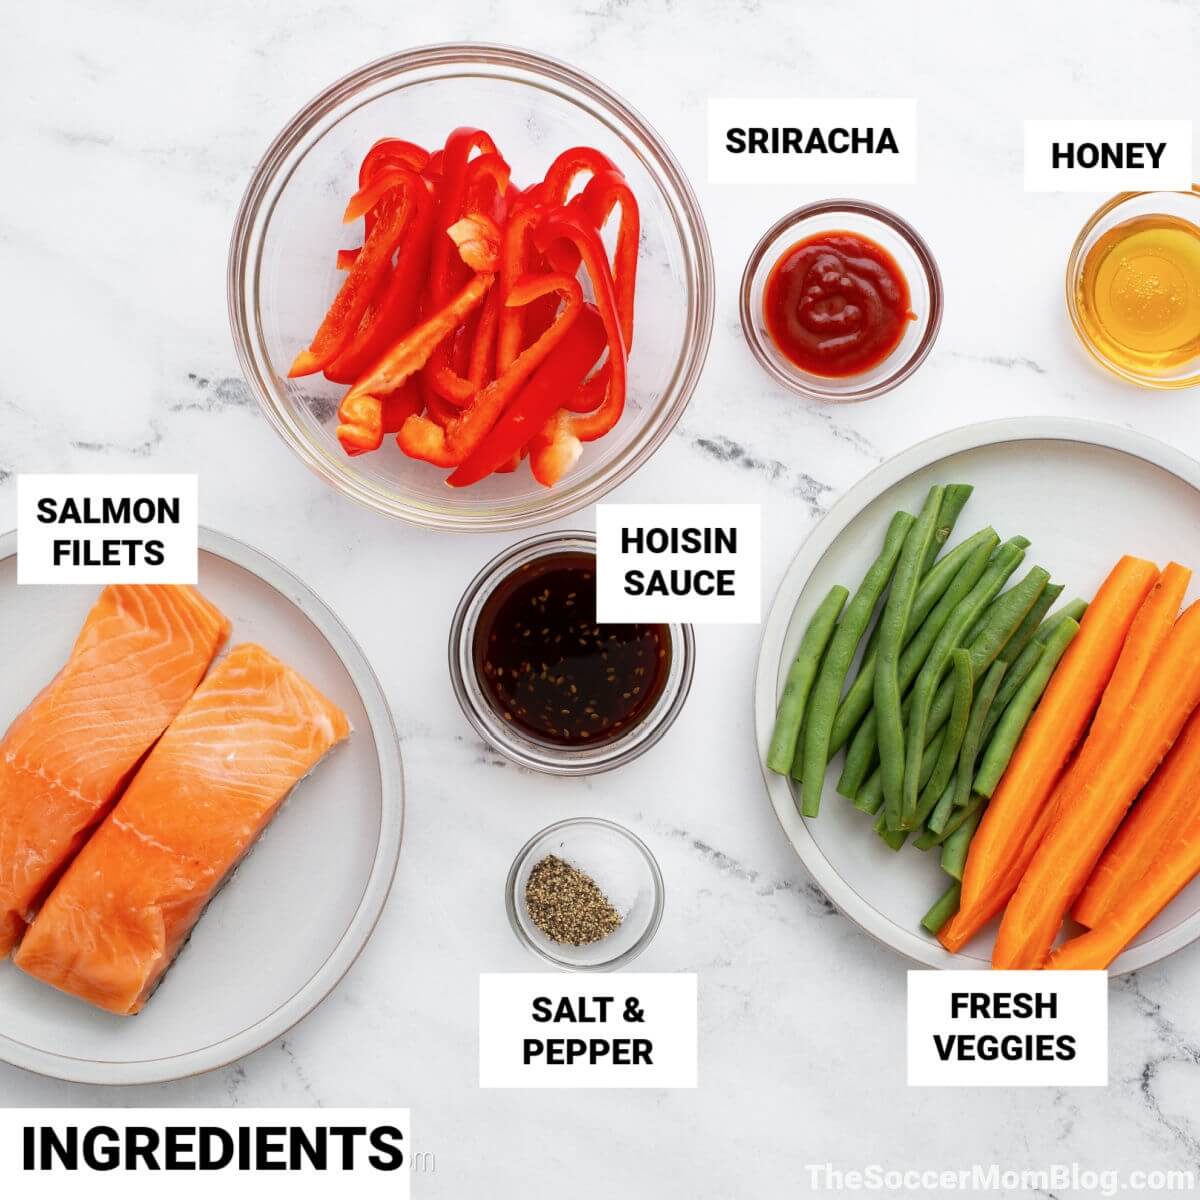 baked salmon ingredients, with text labels